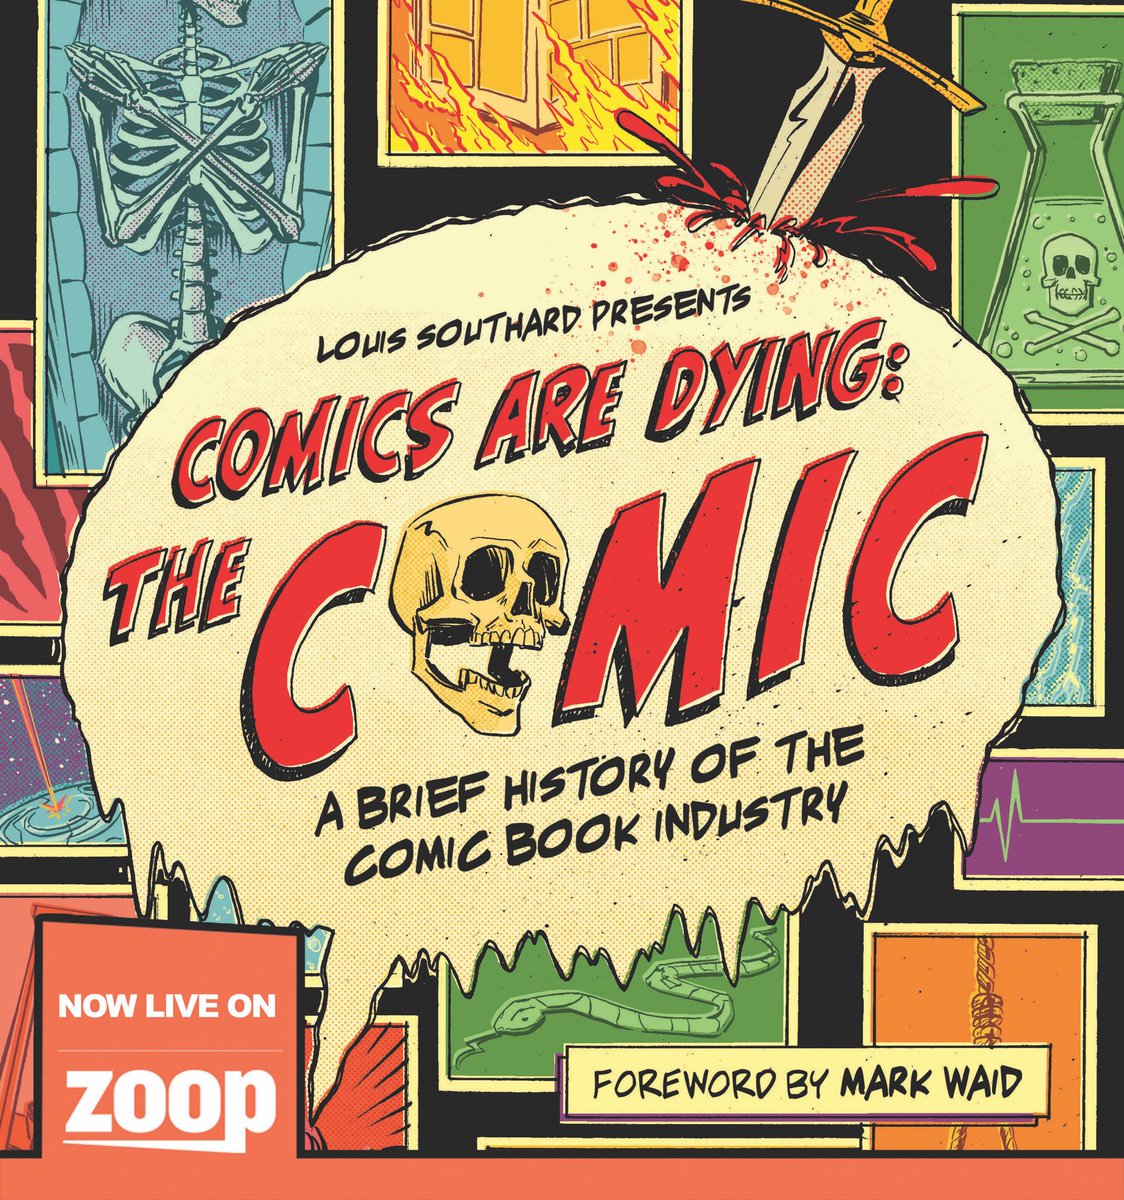 At 9:30 pm EST, I’ll be talking with @ComicWatchHQ on YouTube about all things COMICS ARE DYING: THE COMIC from @WeAreZoop! If you wanna hang out with us and ask a few questions, please stop by! Thanks!